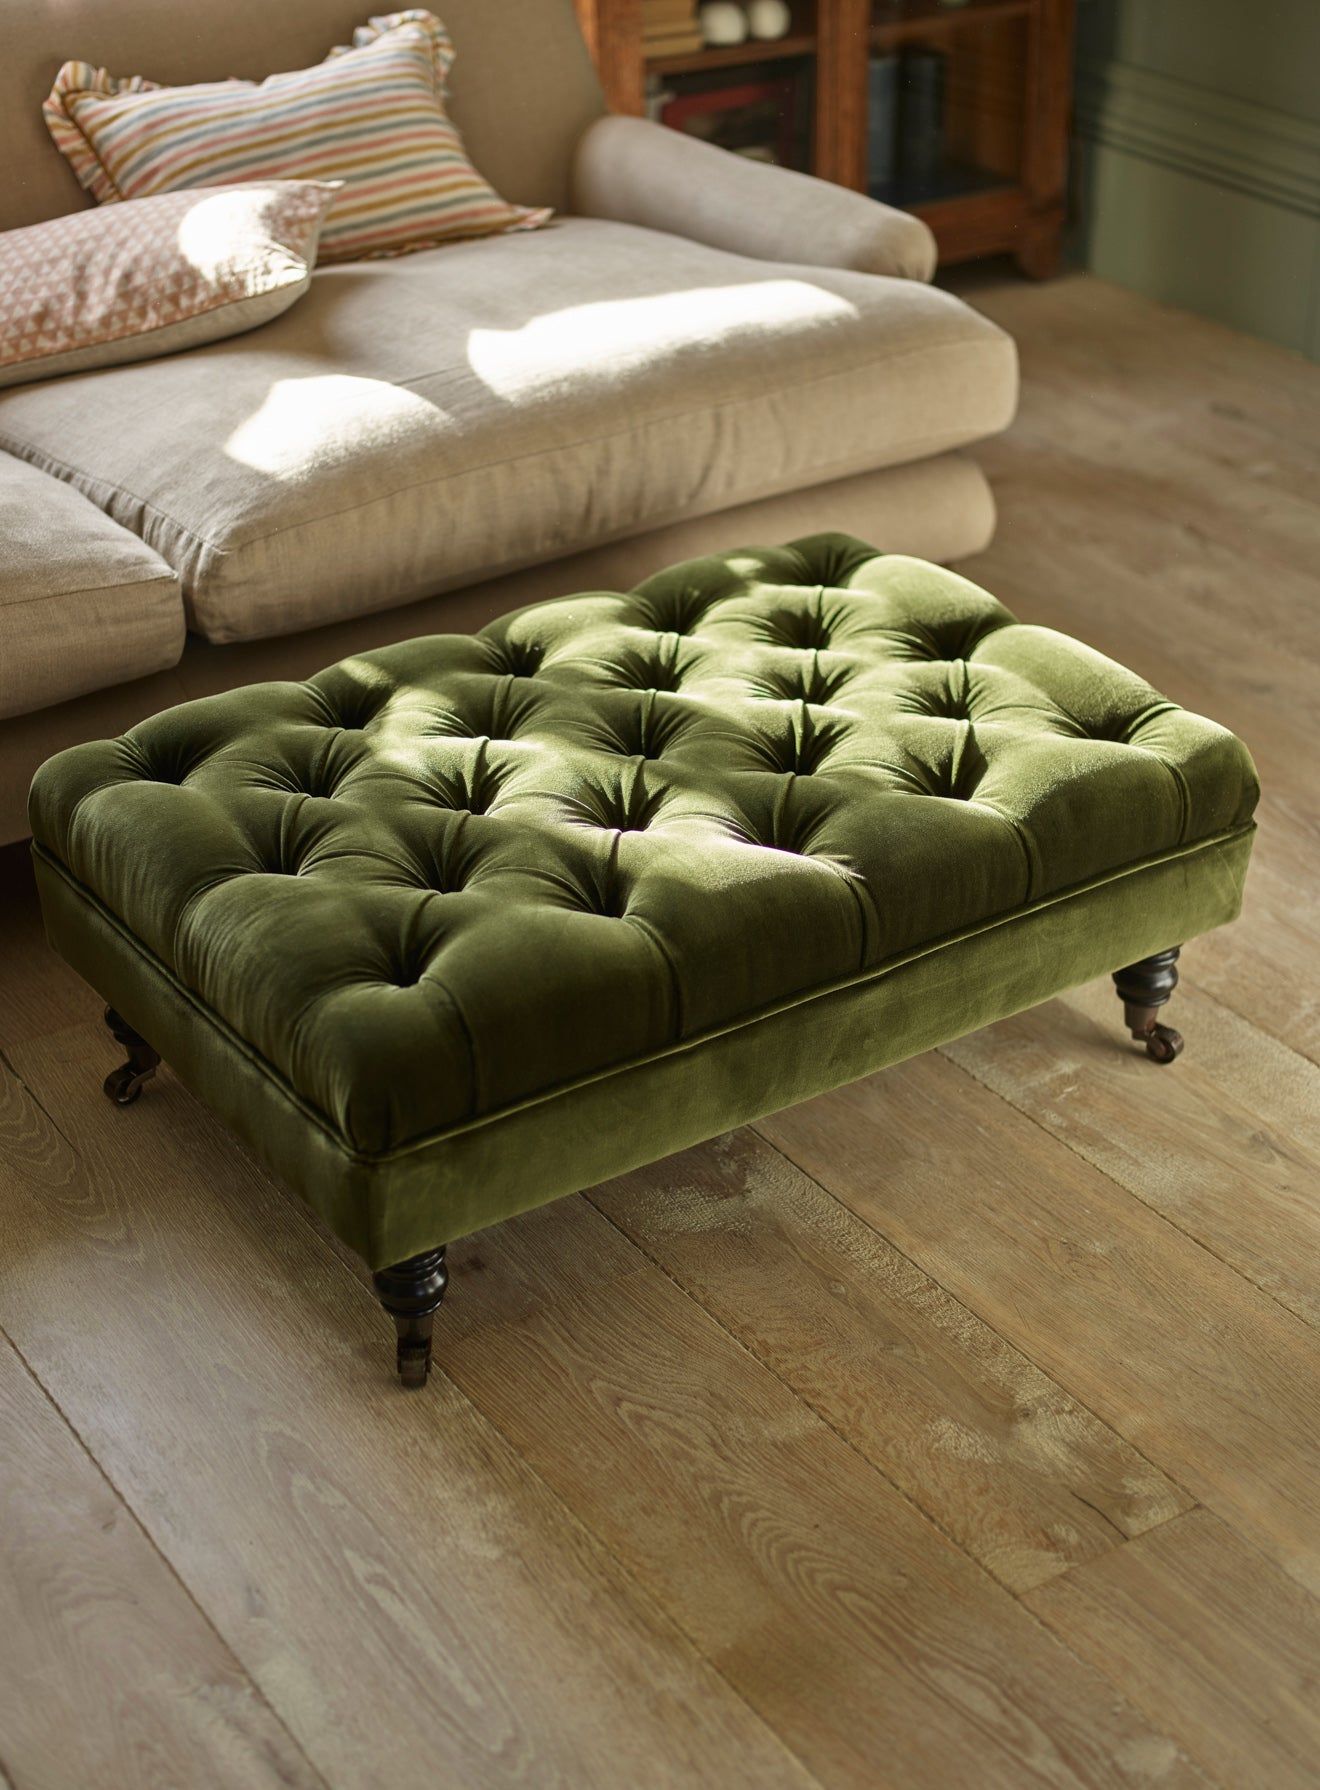 Footstools : The Ultimate Guide to Choosing the Perfect Footstools for Your Home Decor